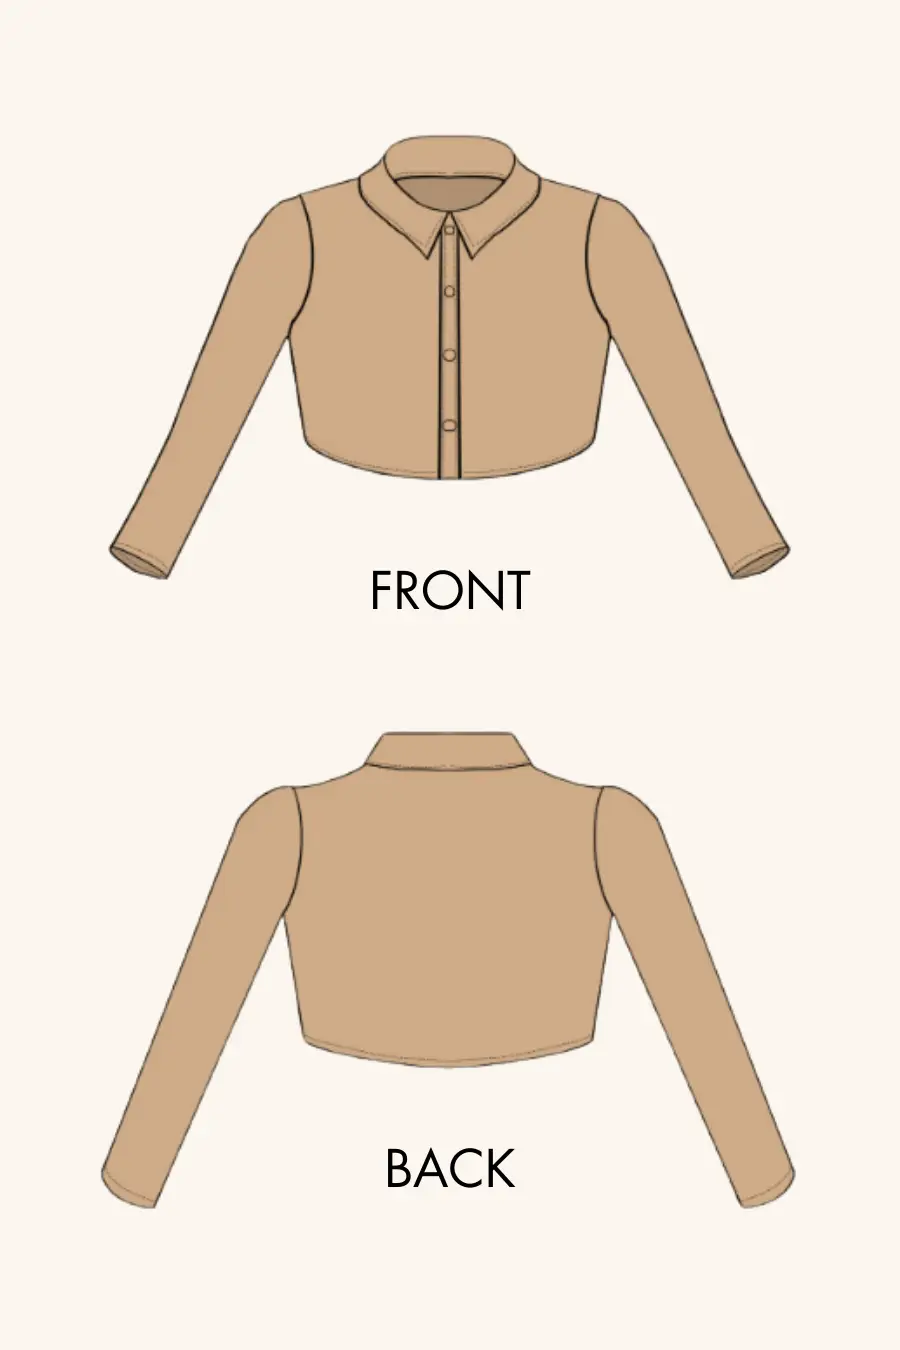 2D image of the crop shirt sewing patten from winslet's patterns